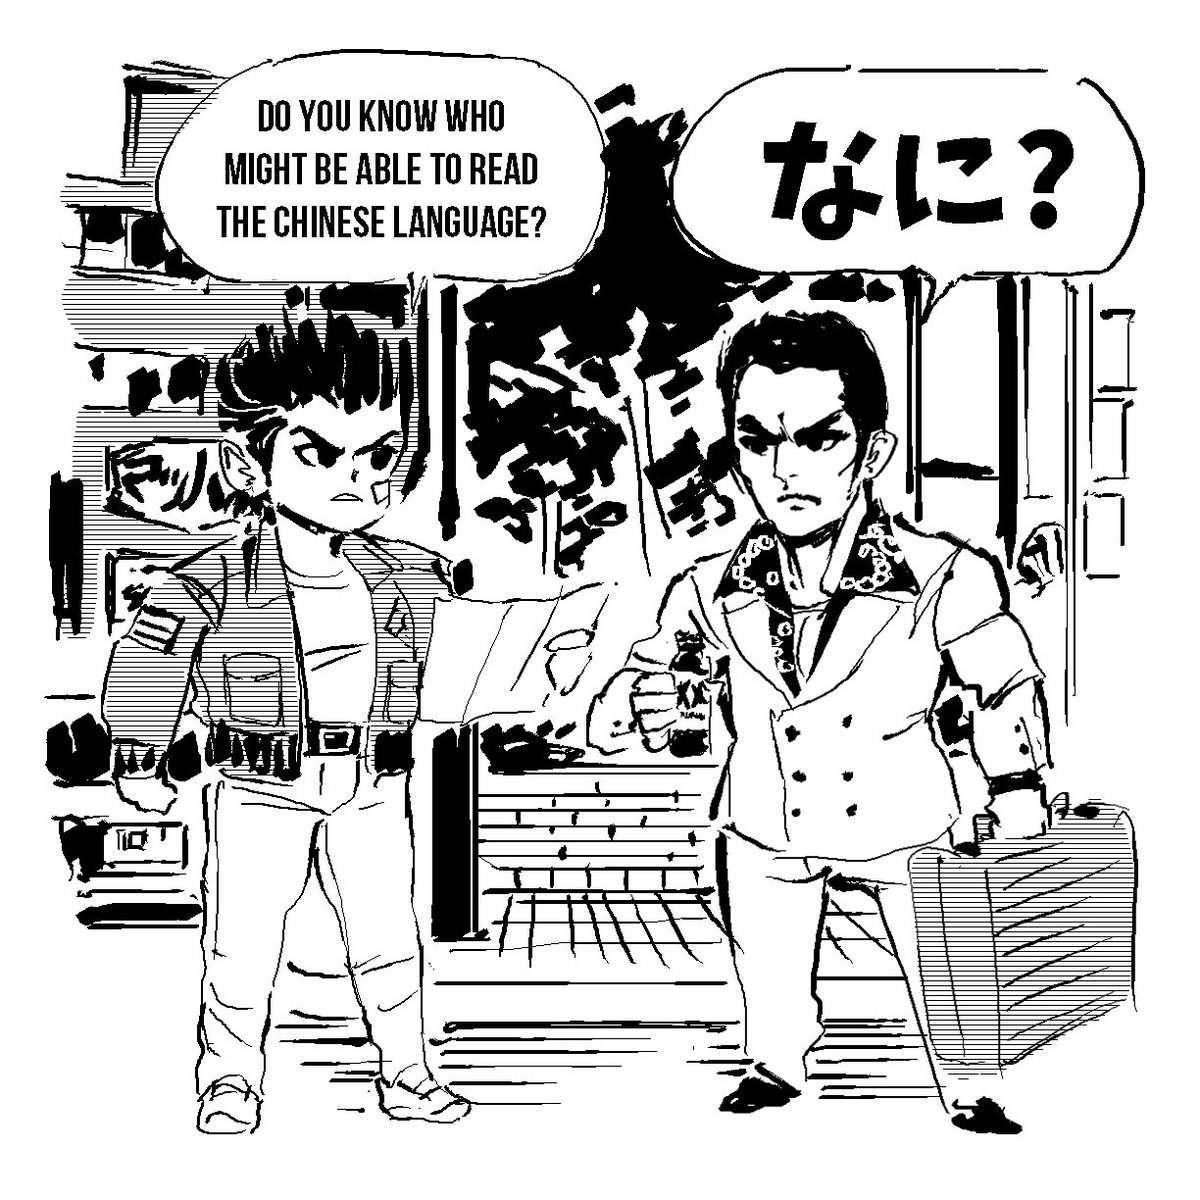 crossover pic

#龍が如く #Shenmue #Yakuza 

https://t.co/NAJypYNwmD 